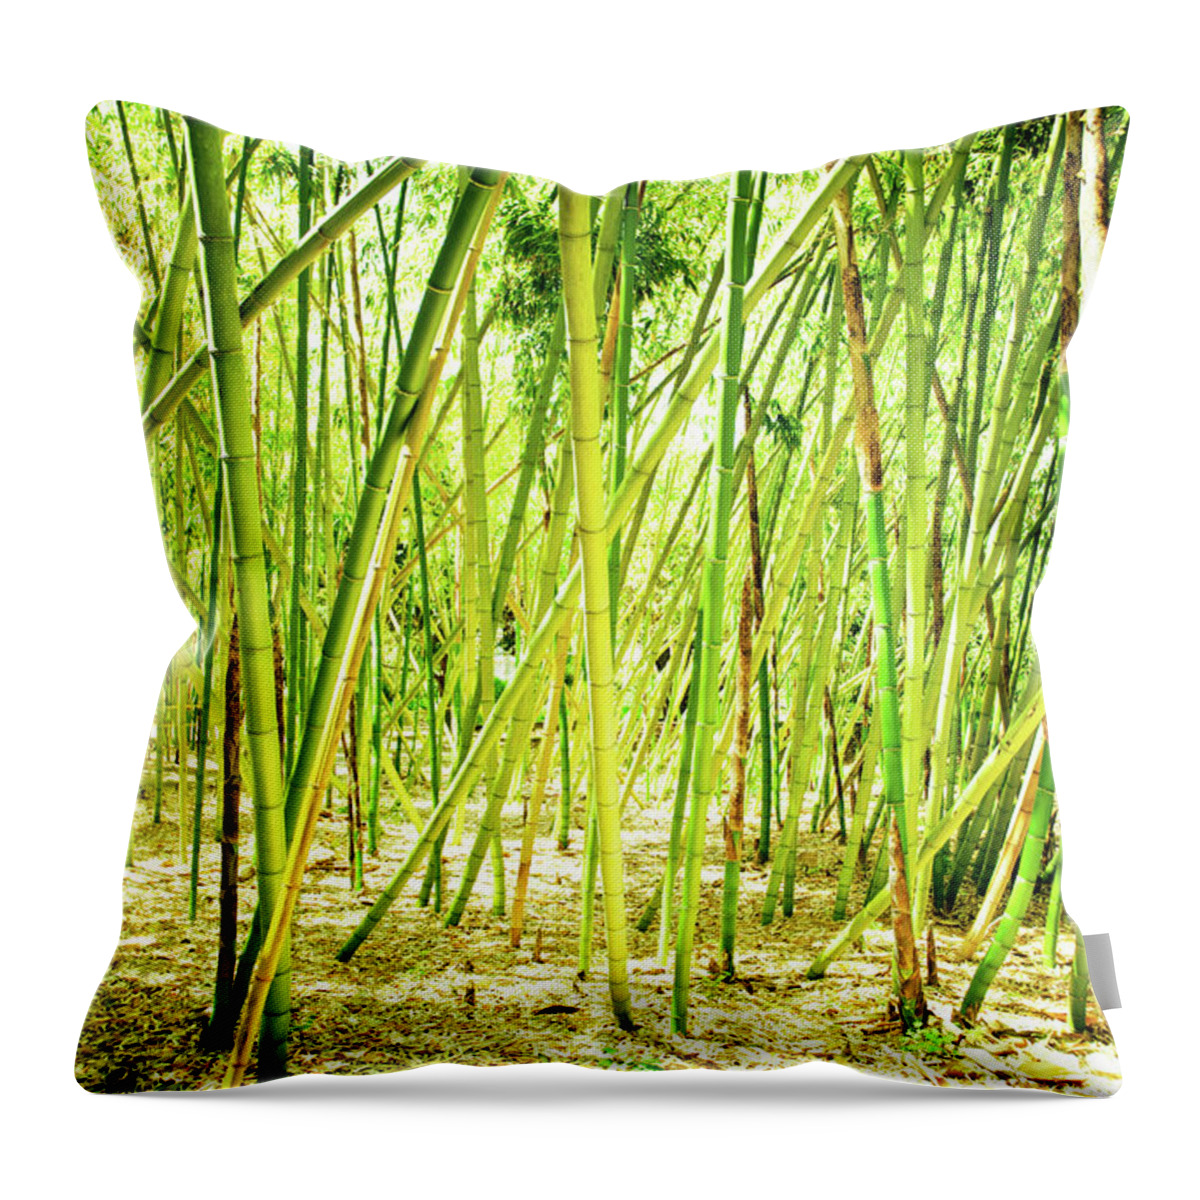 Environmental Conservation Throw Pillow featuring the photograph Bamboo Trees With Sunlight by Manley099